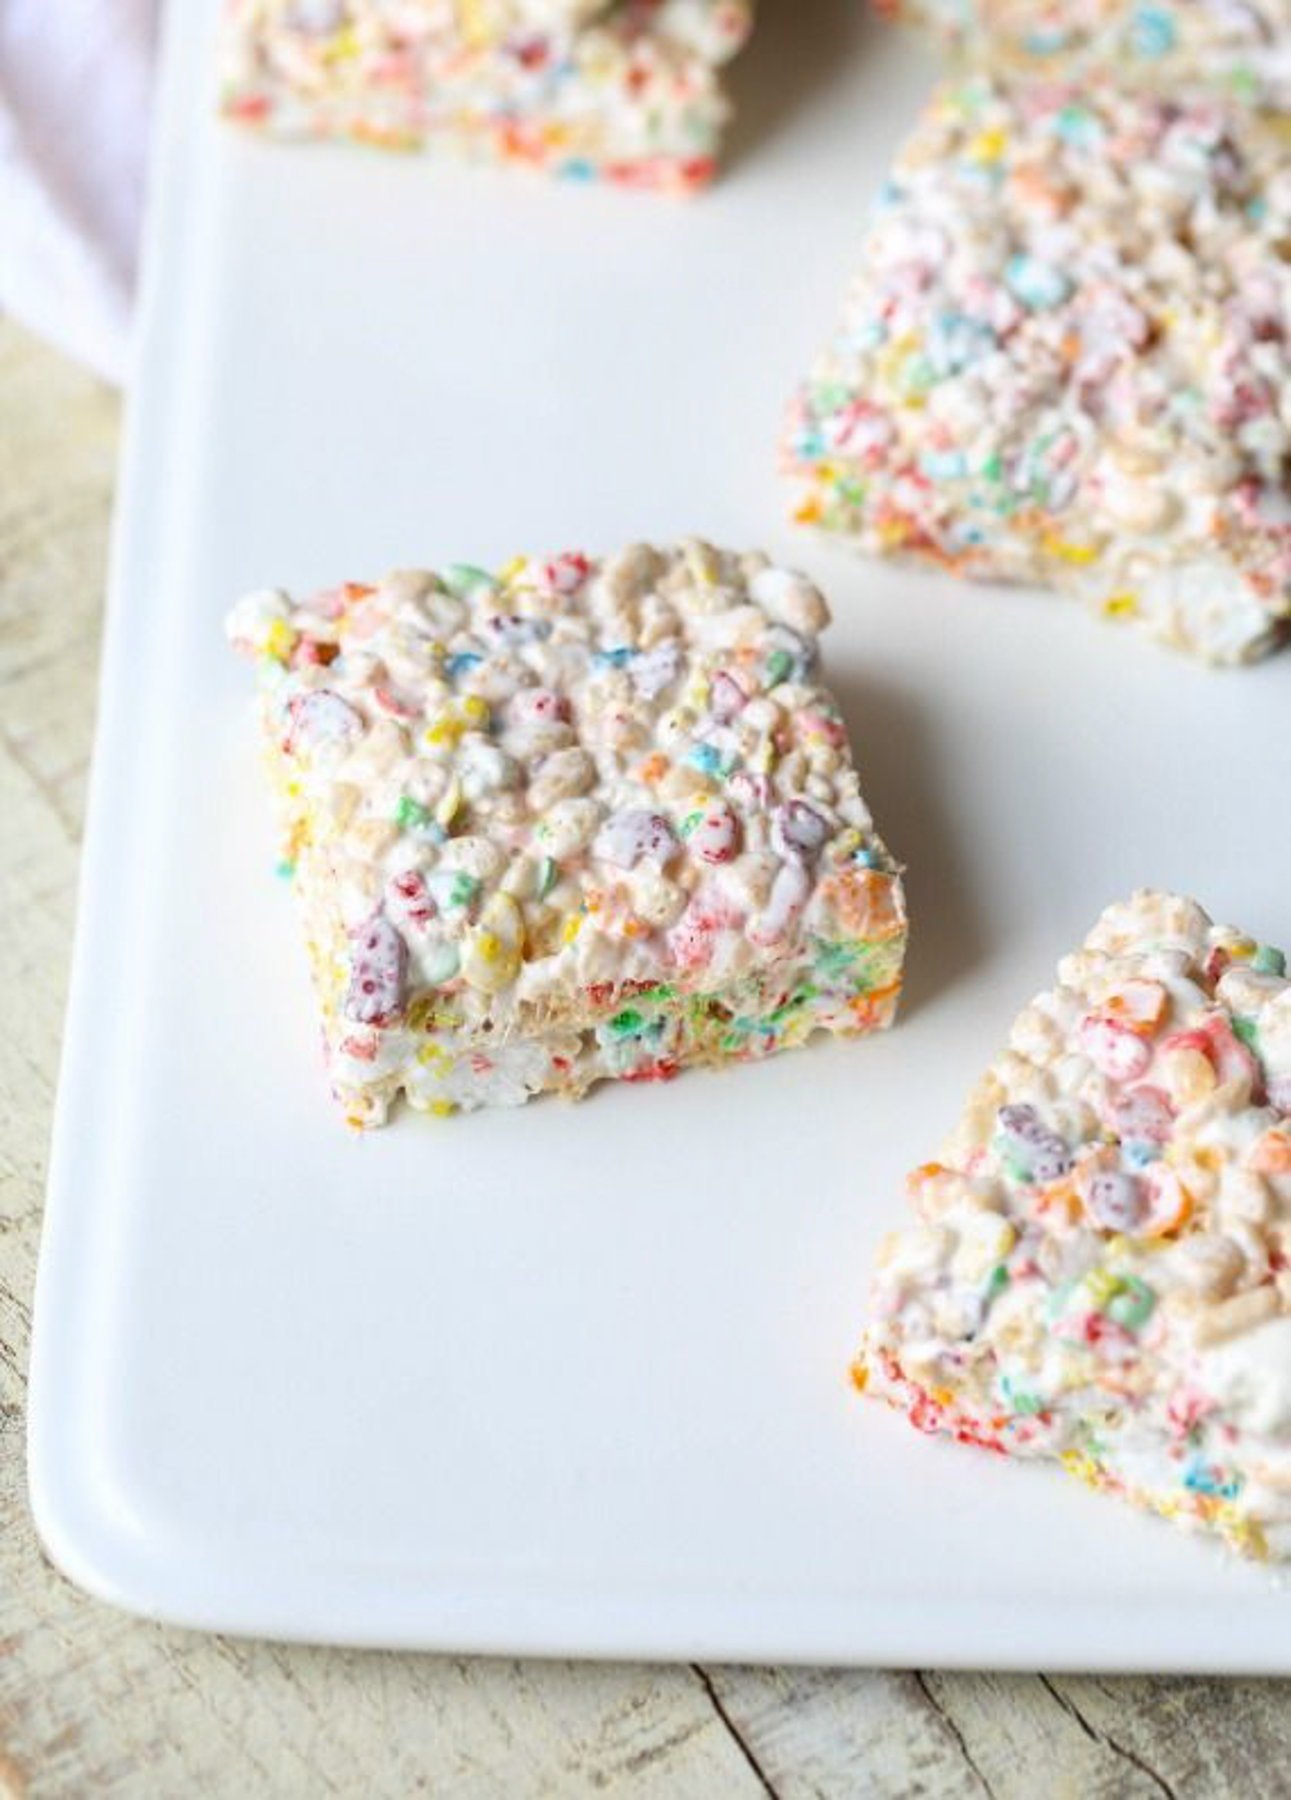 Krispie Treat squares made with Fluff and mini marshmallows on a platter